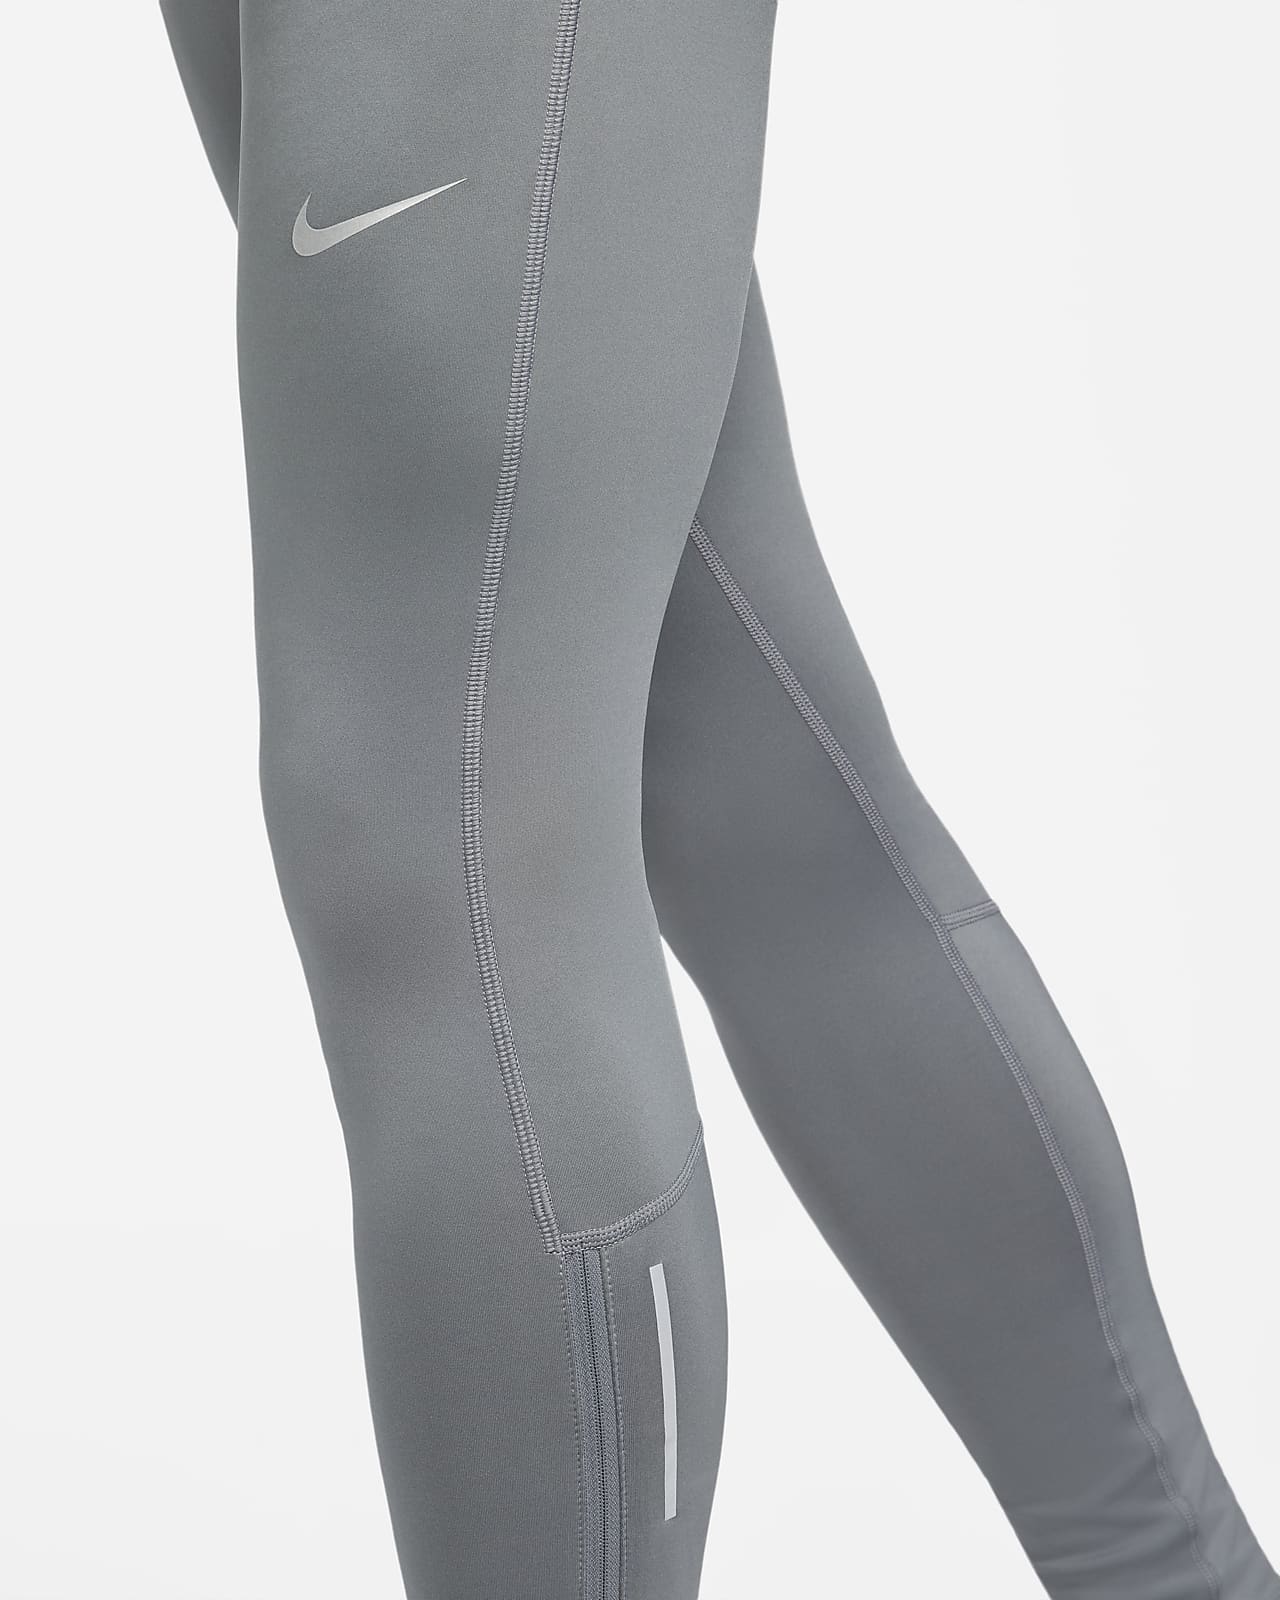 Nike Running DRI-FIT Challenger tights in black